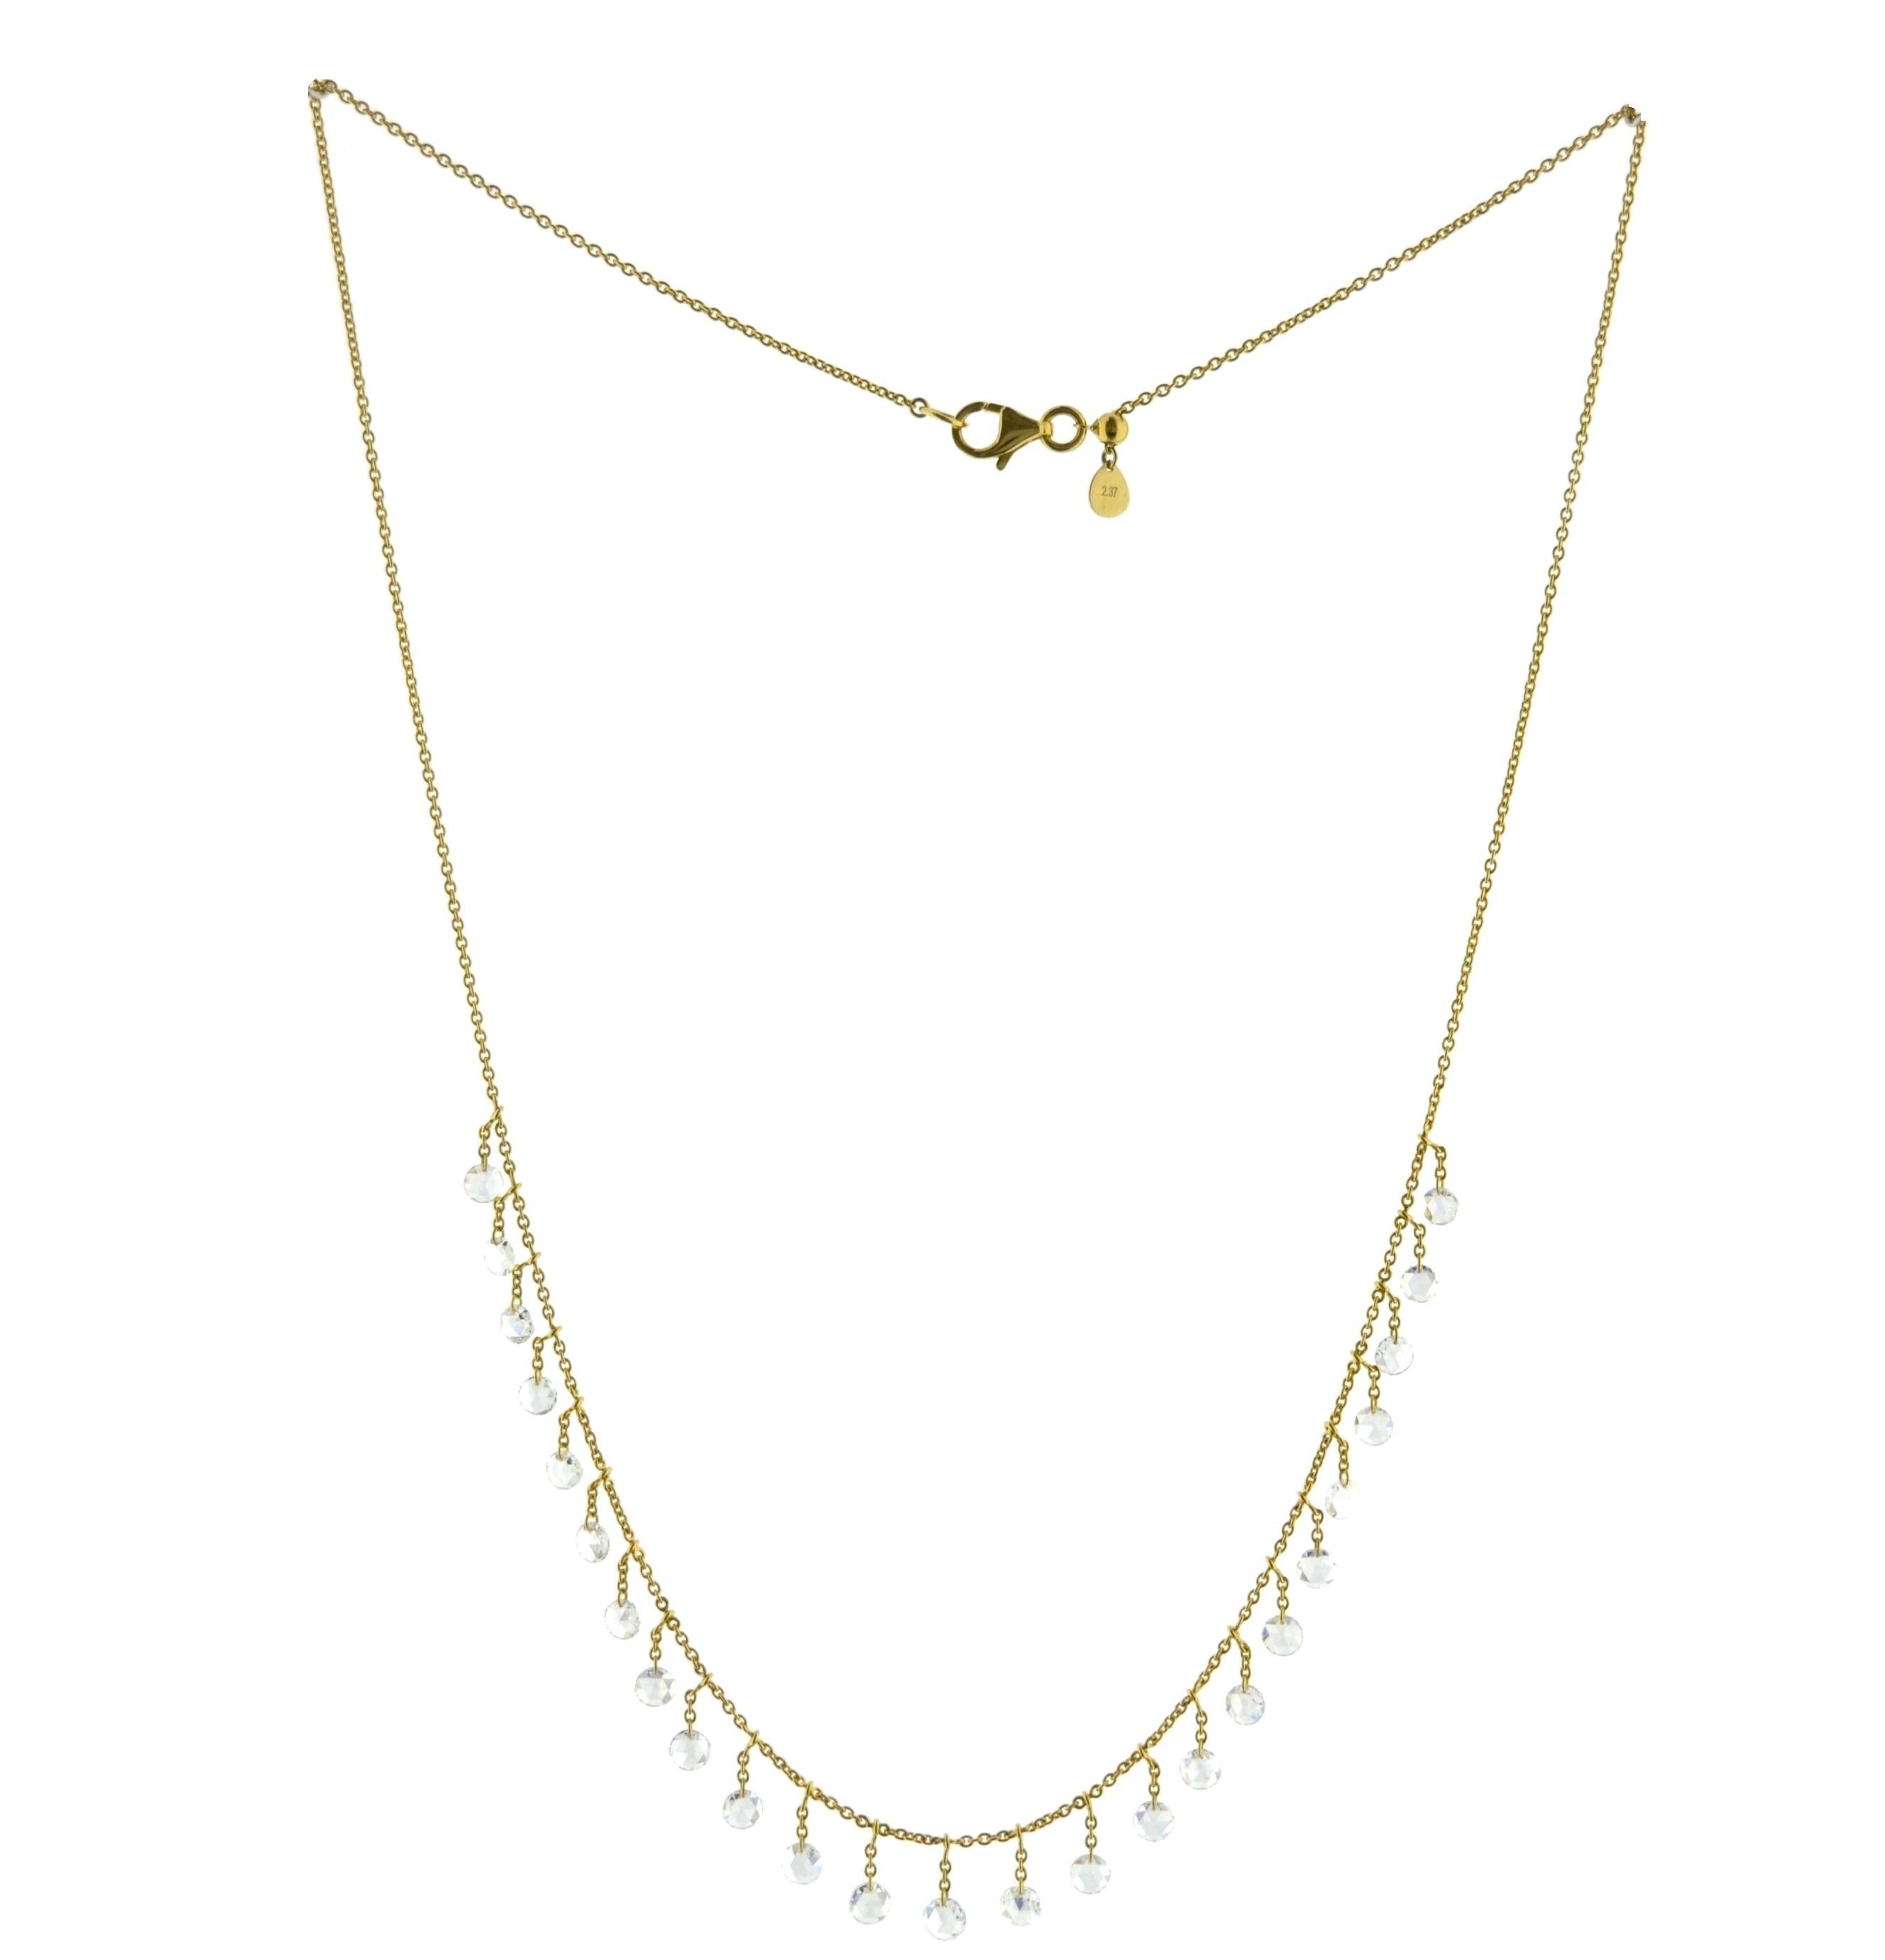 JR 2.37 Carat Diamond Rose cut Dangling Necklace 18 Karat Yellow Gold

This contemporary piece of necklace is made with 25pcs of diamond Rose Cut and it eludes femininity & grace. Diamond Rose Cut Dangling Choker has Slider ball to adjust the length